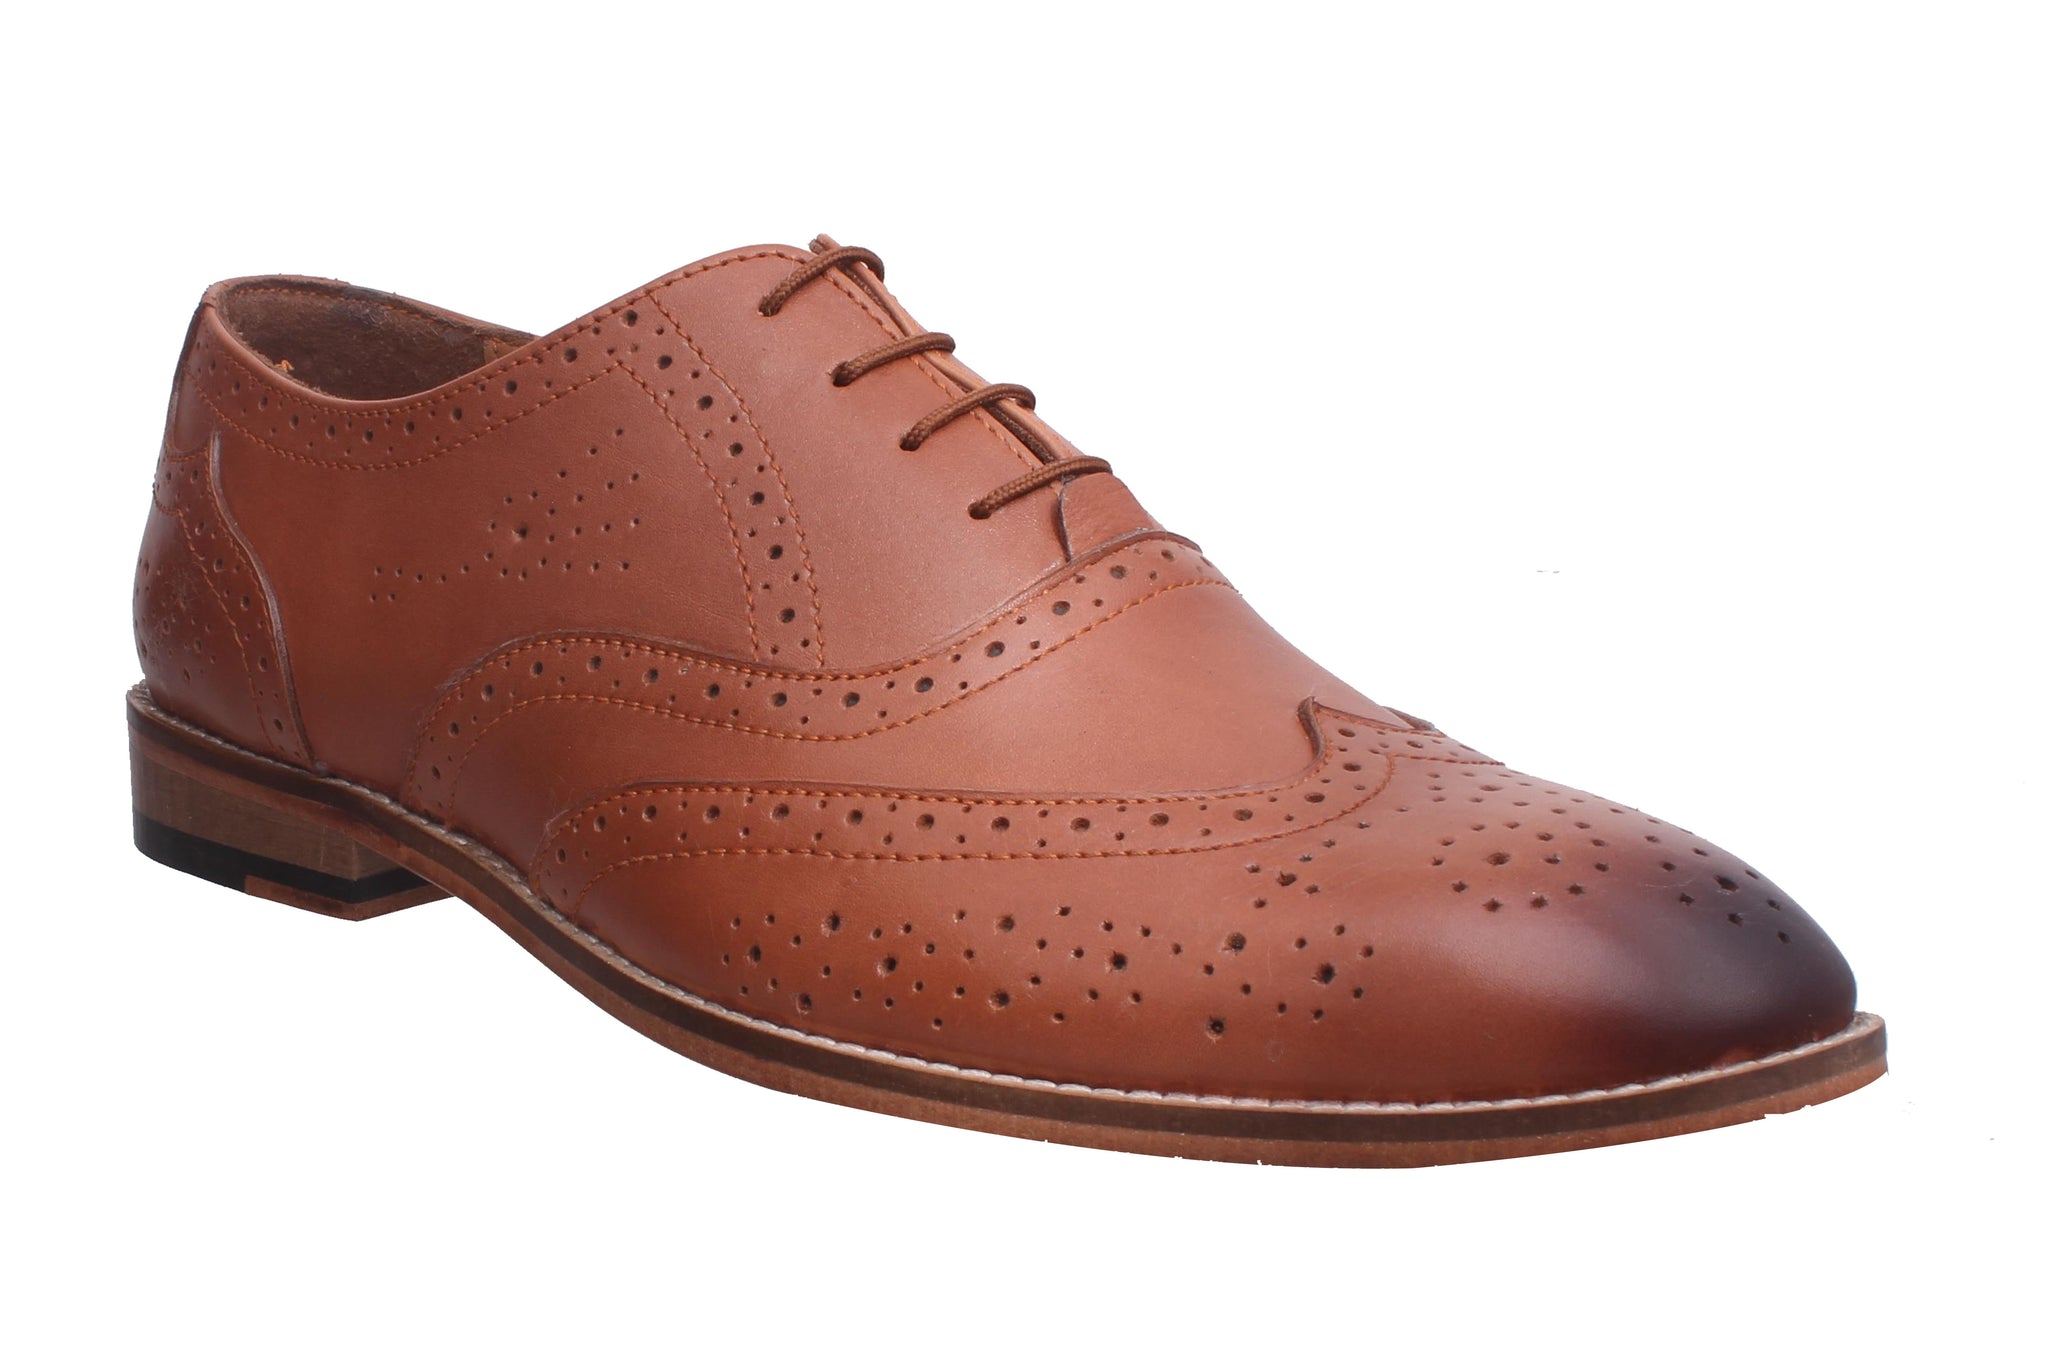 Castellano Wing-Tip Brown Oxfords Shoes 